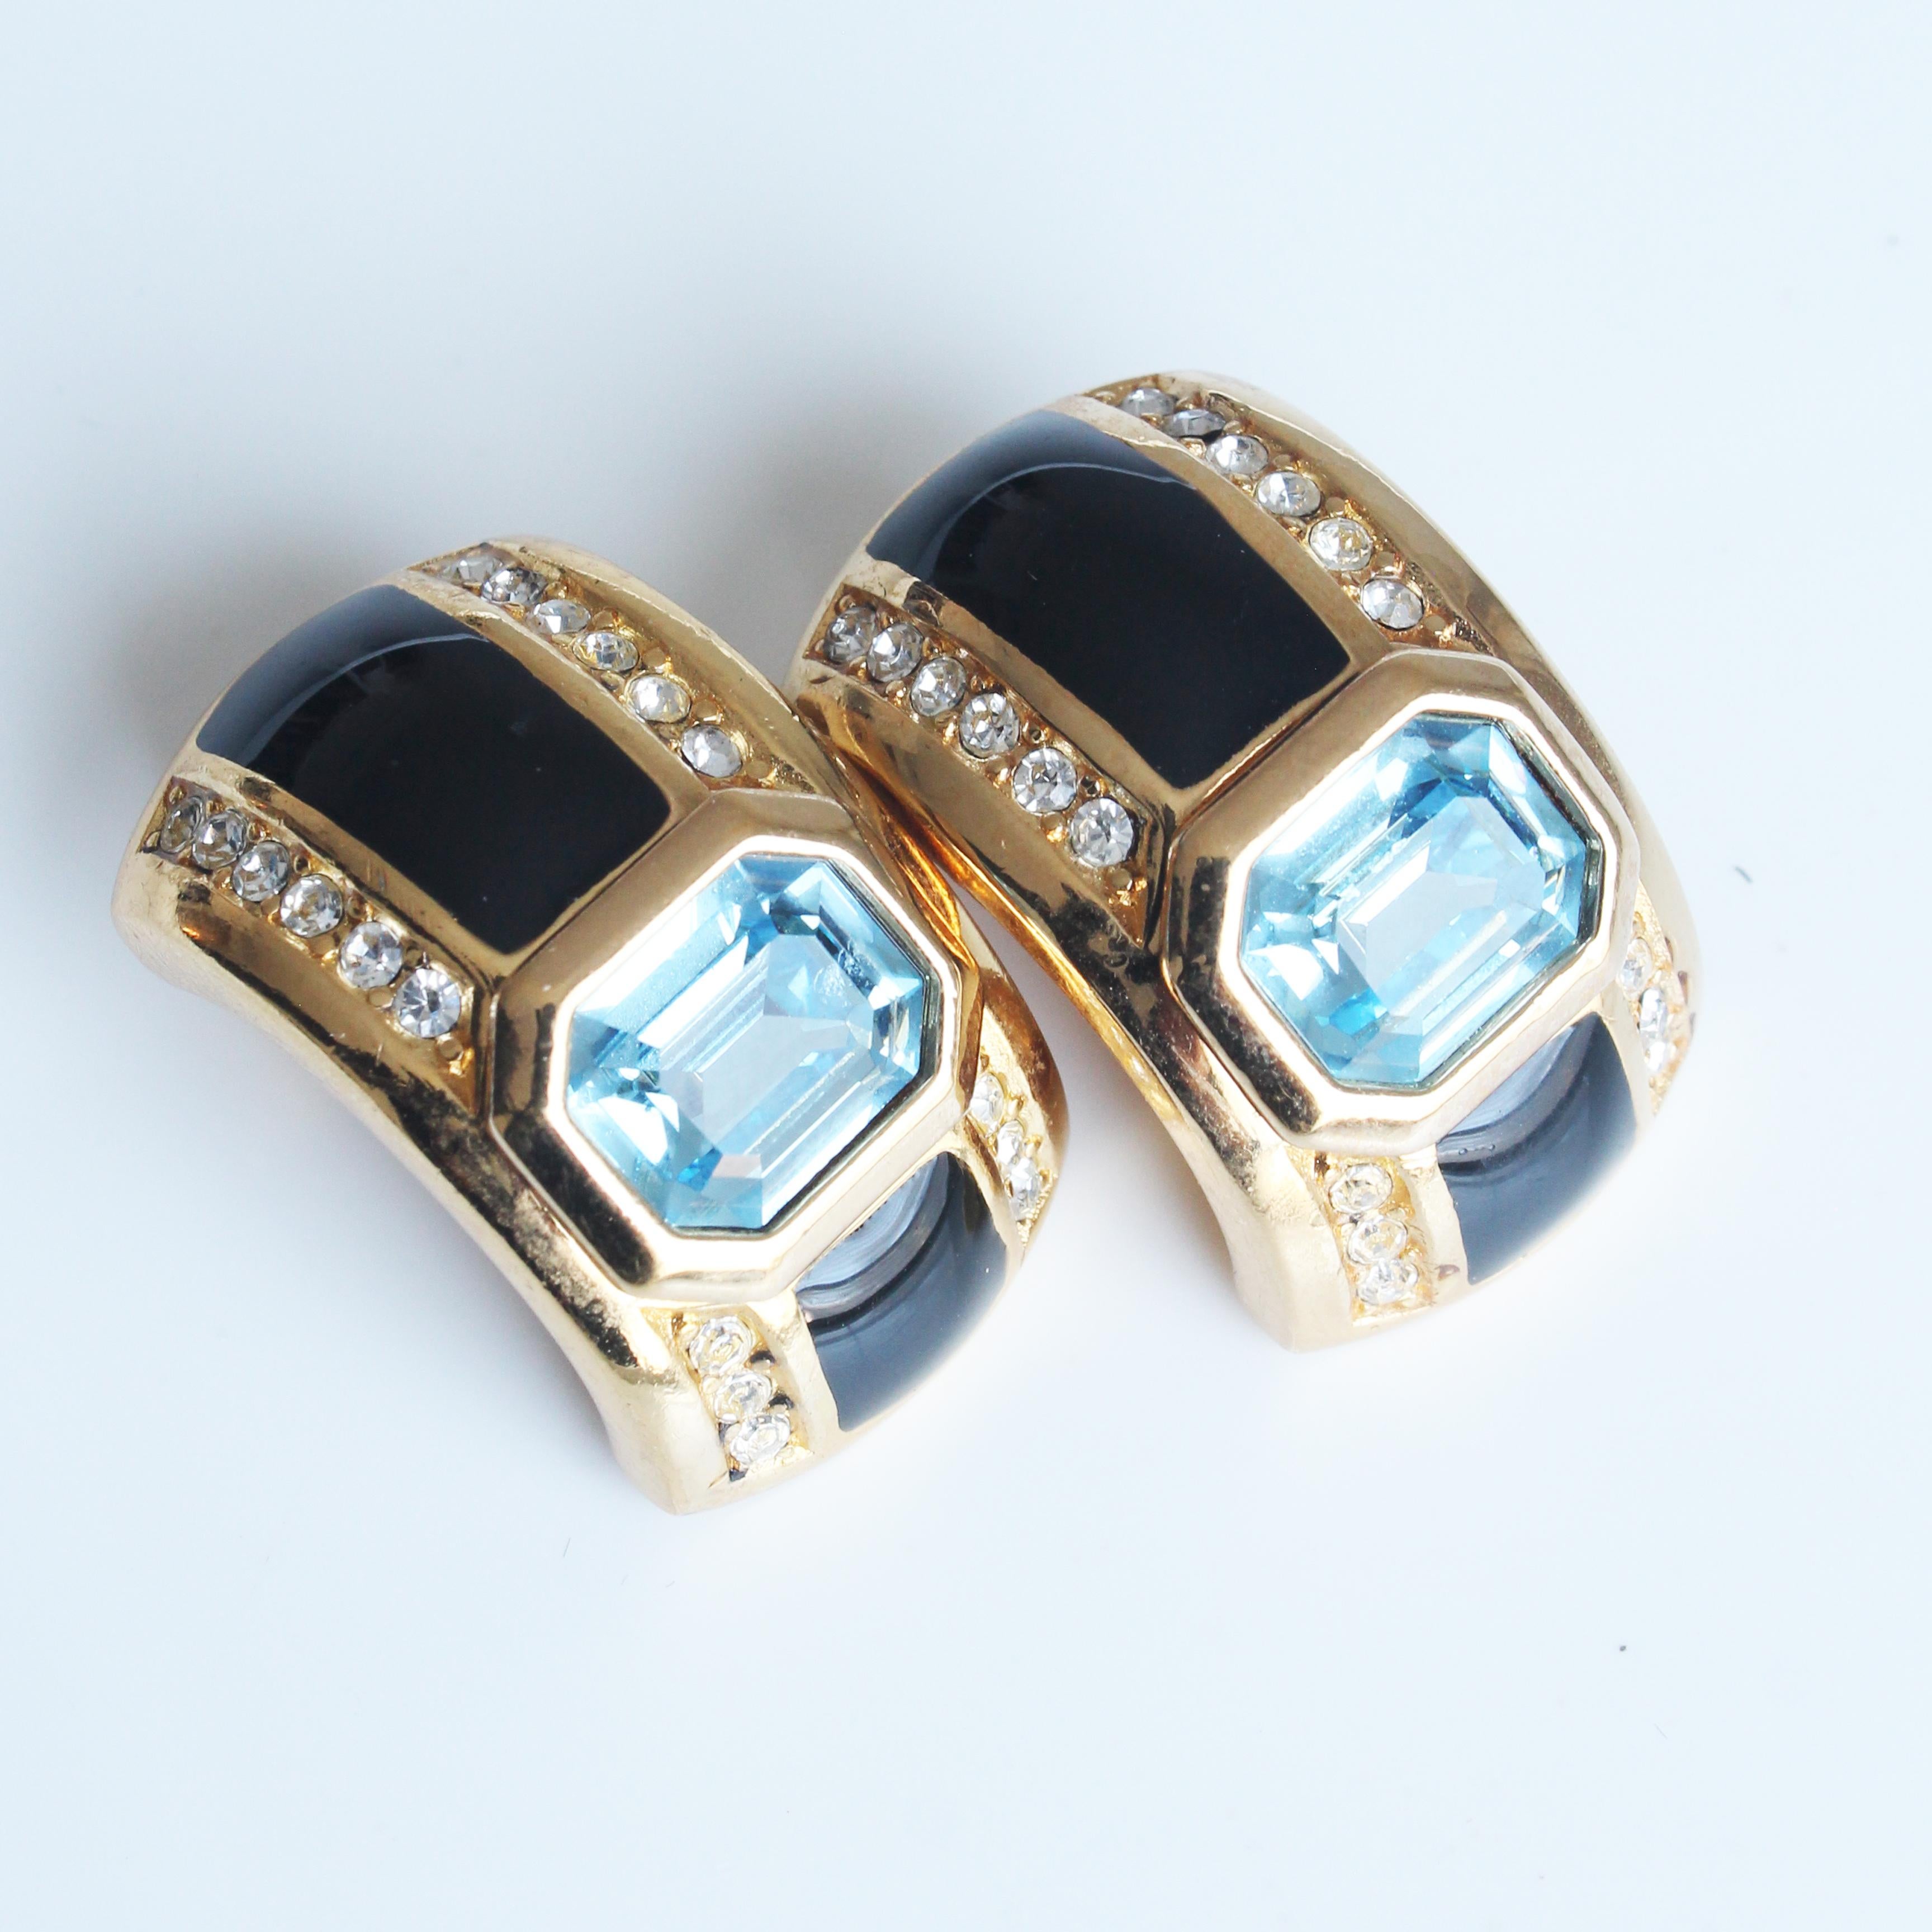 Christian Dior Art Deco Earrings with Faux Sapphire Topaz Crystals 1980s For Sale 10